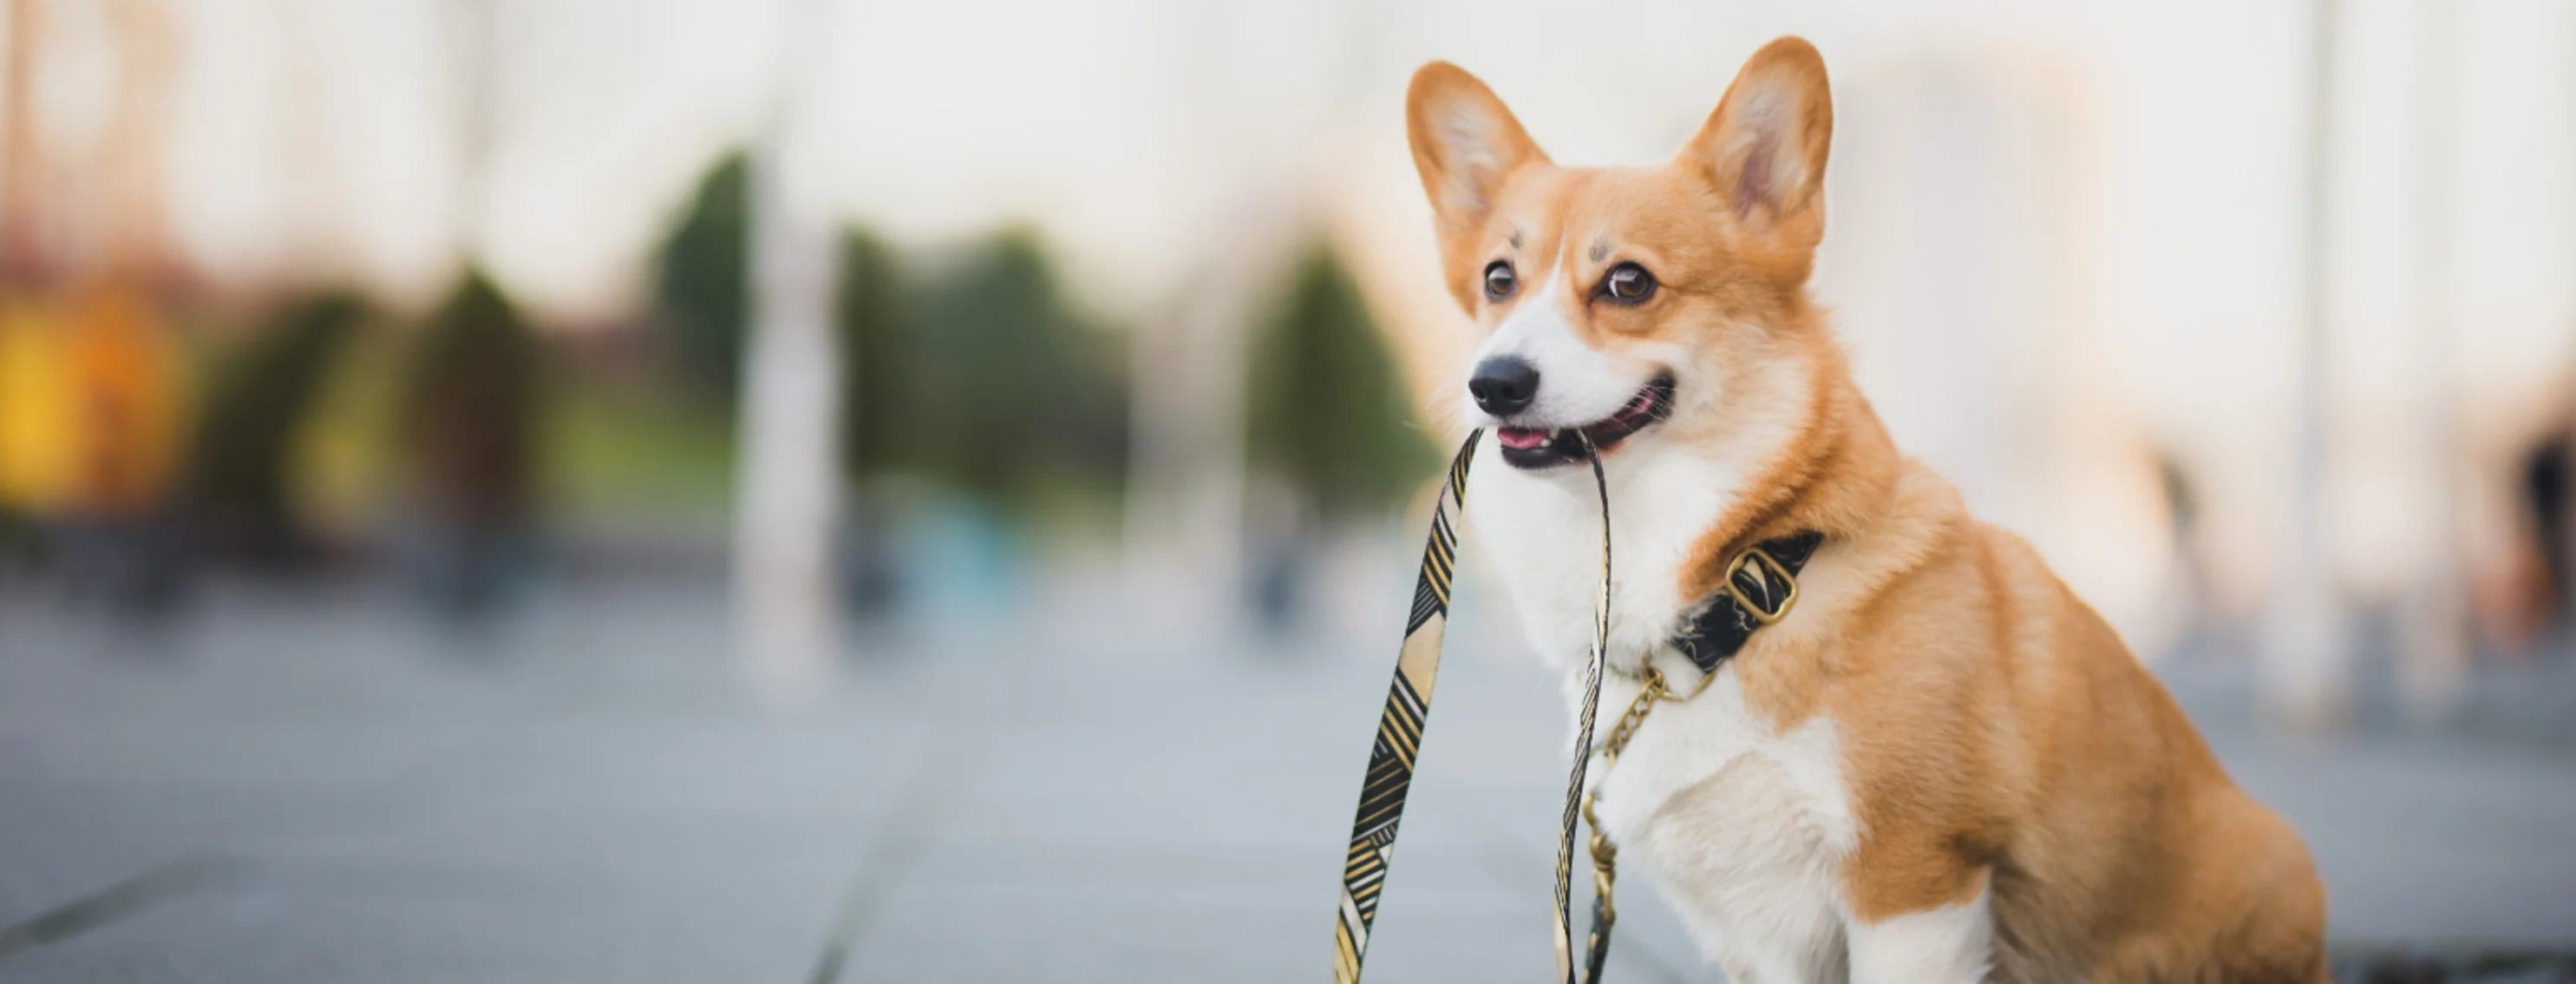 Dog Biting Leash with Blur Cityscape Background